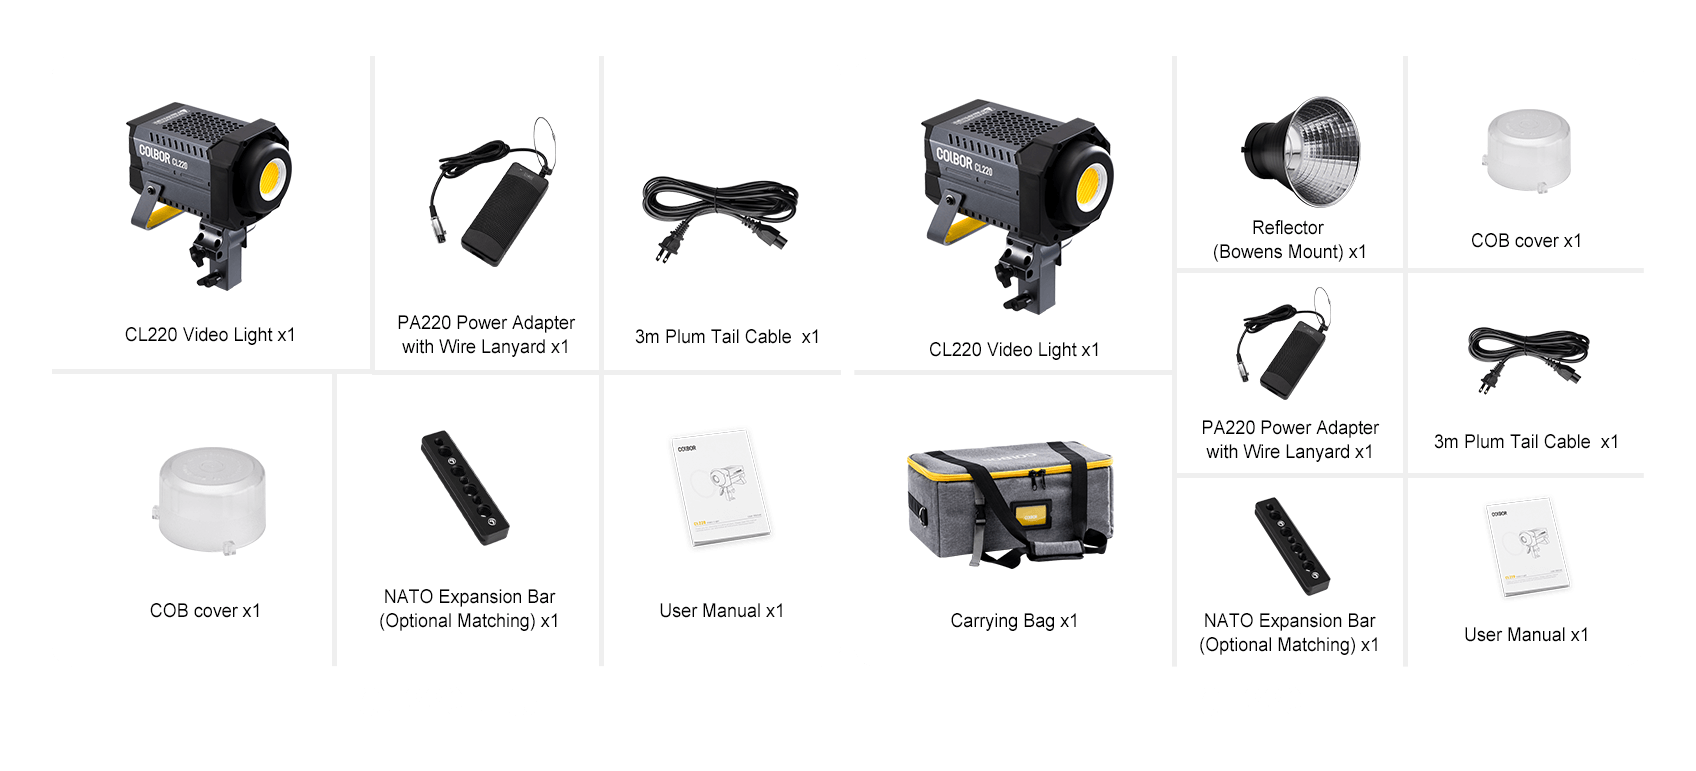 COLBOR CL220 has 2 versions - one has carrying bag and reflector and the other not. 